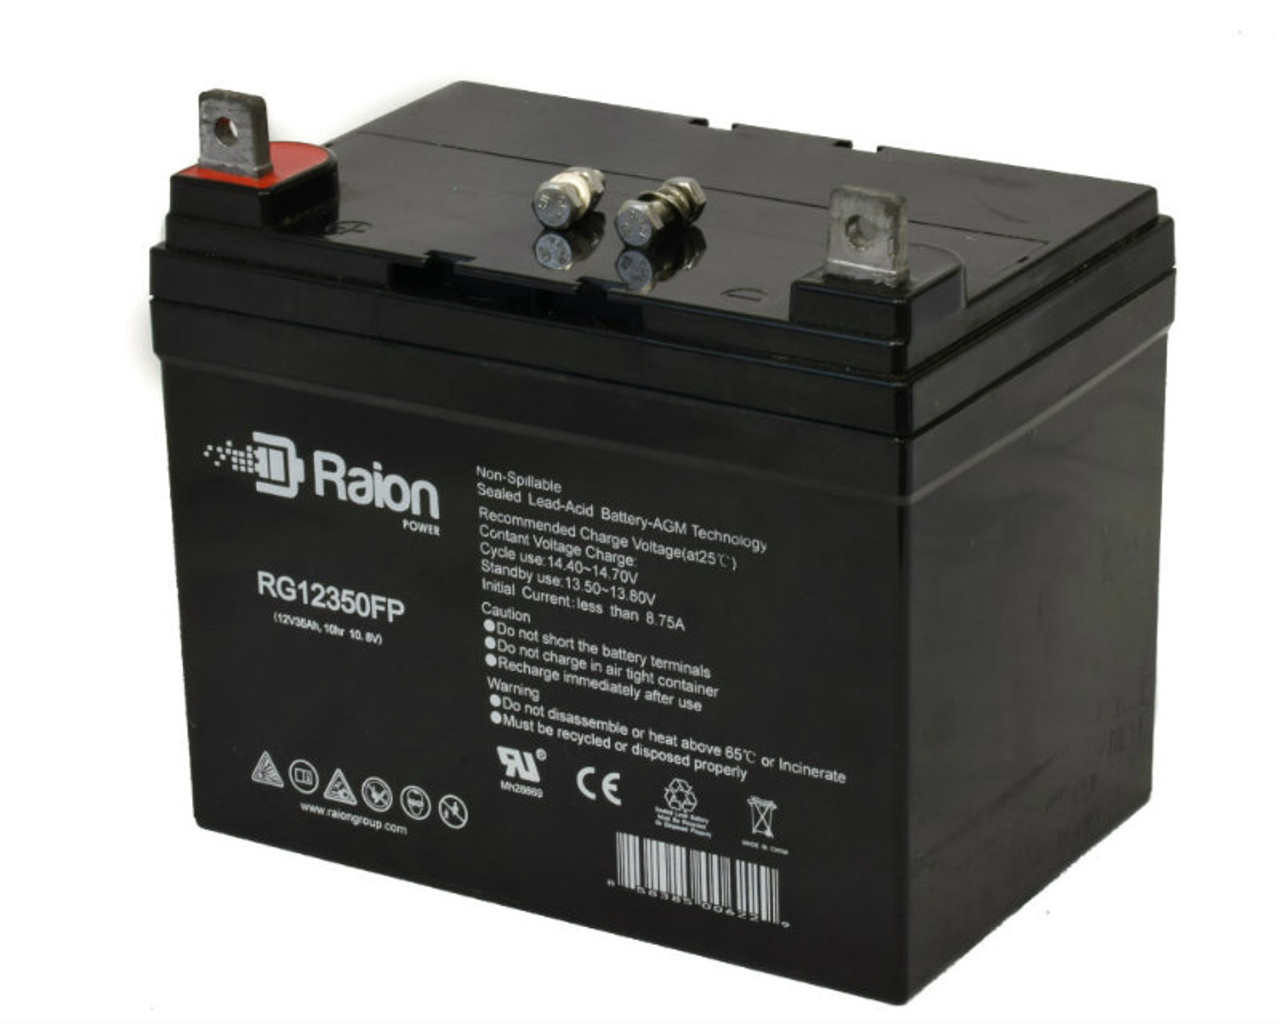 Raion Power Replacement 12V 35Ah RG12350FP Battery for Ingersoll Equipment 110